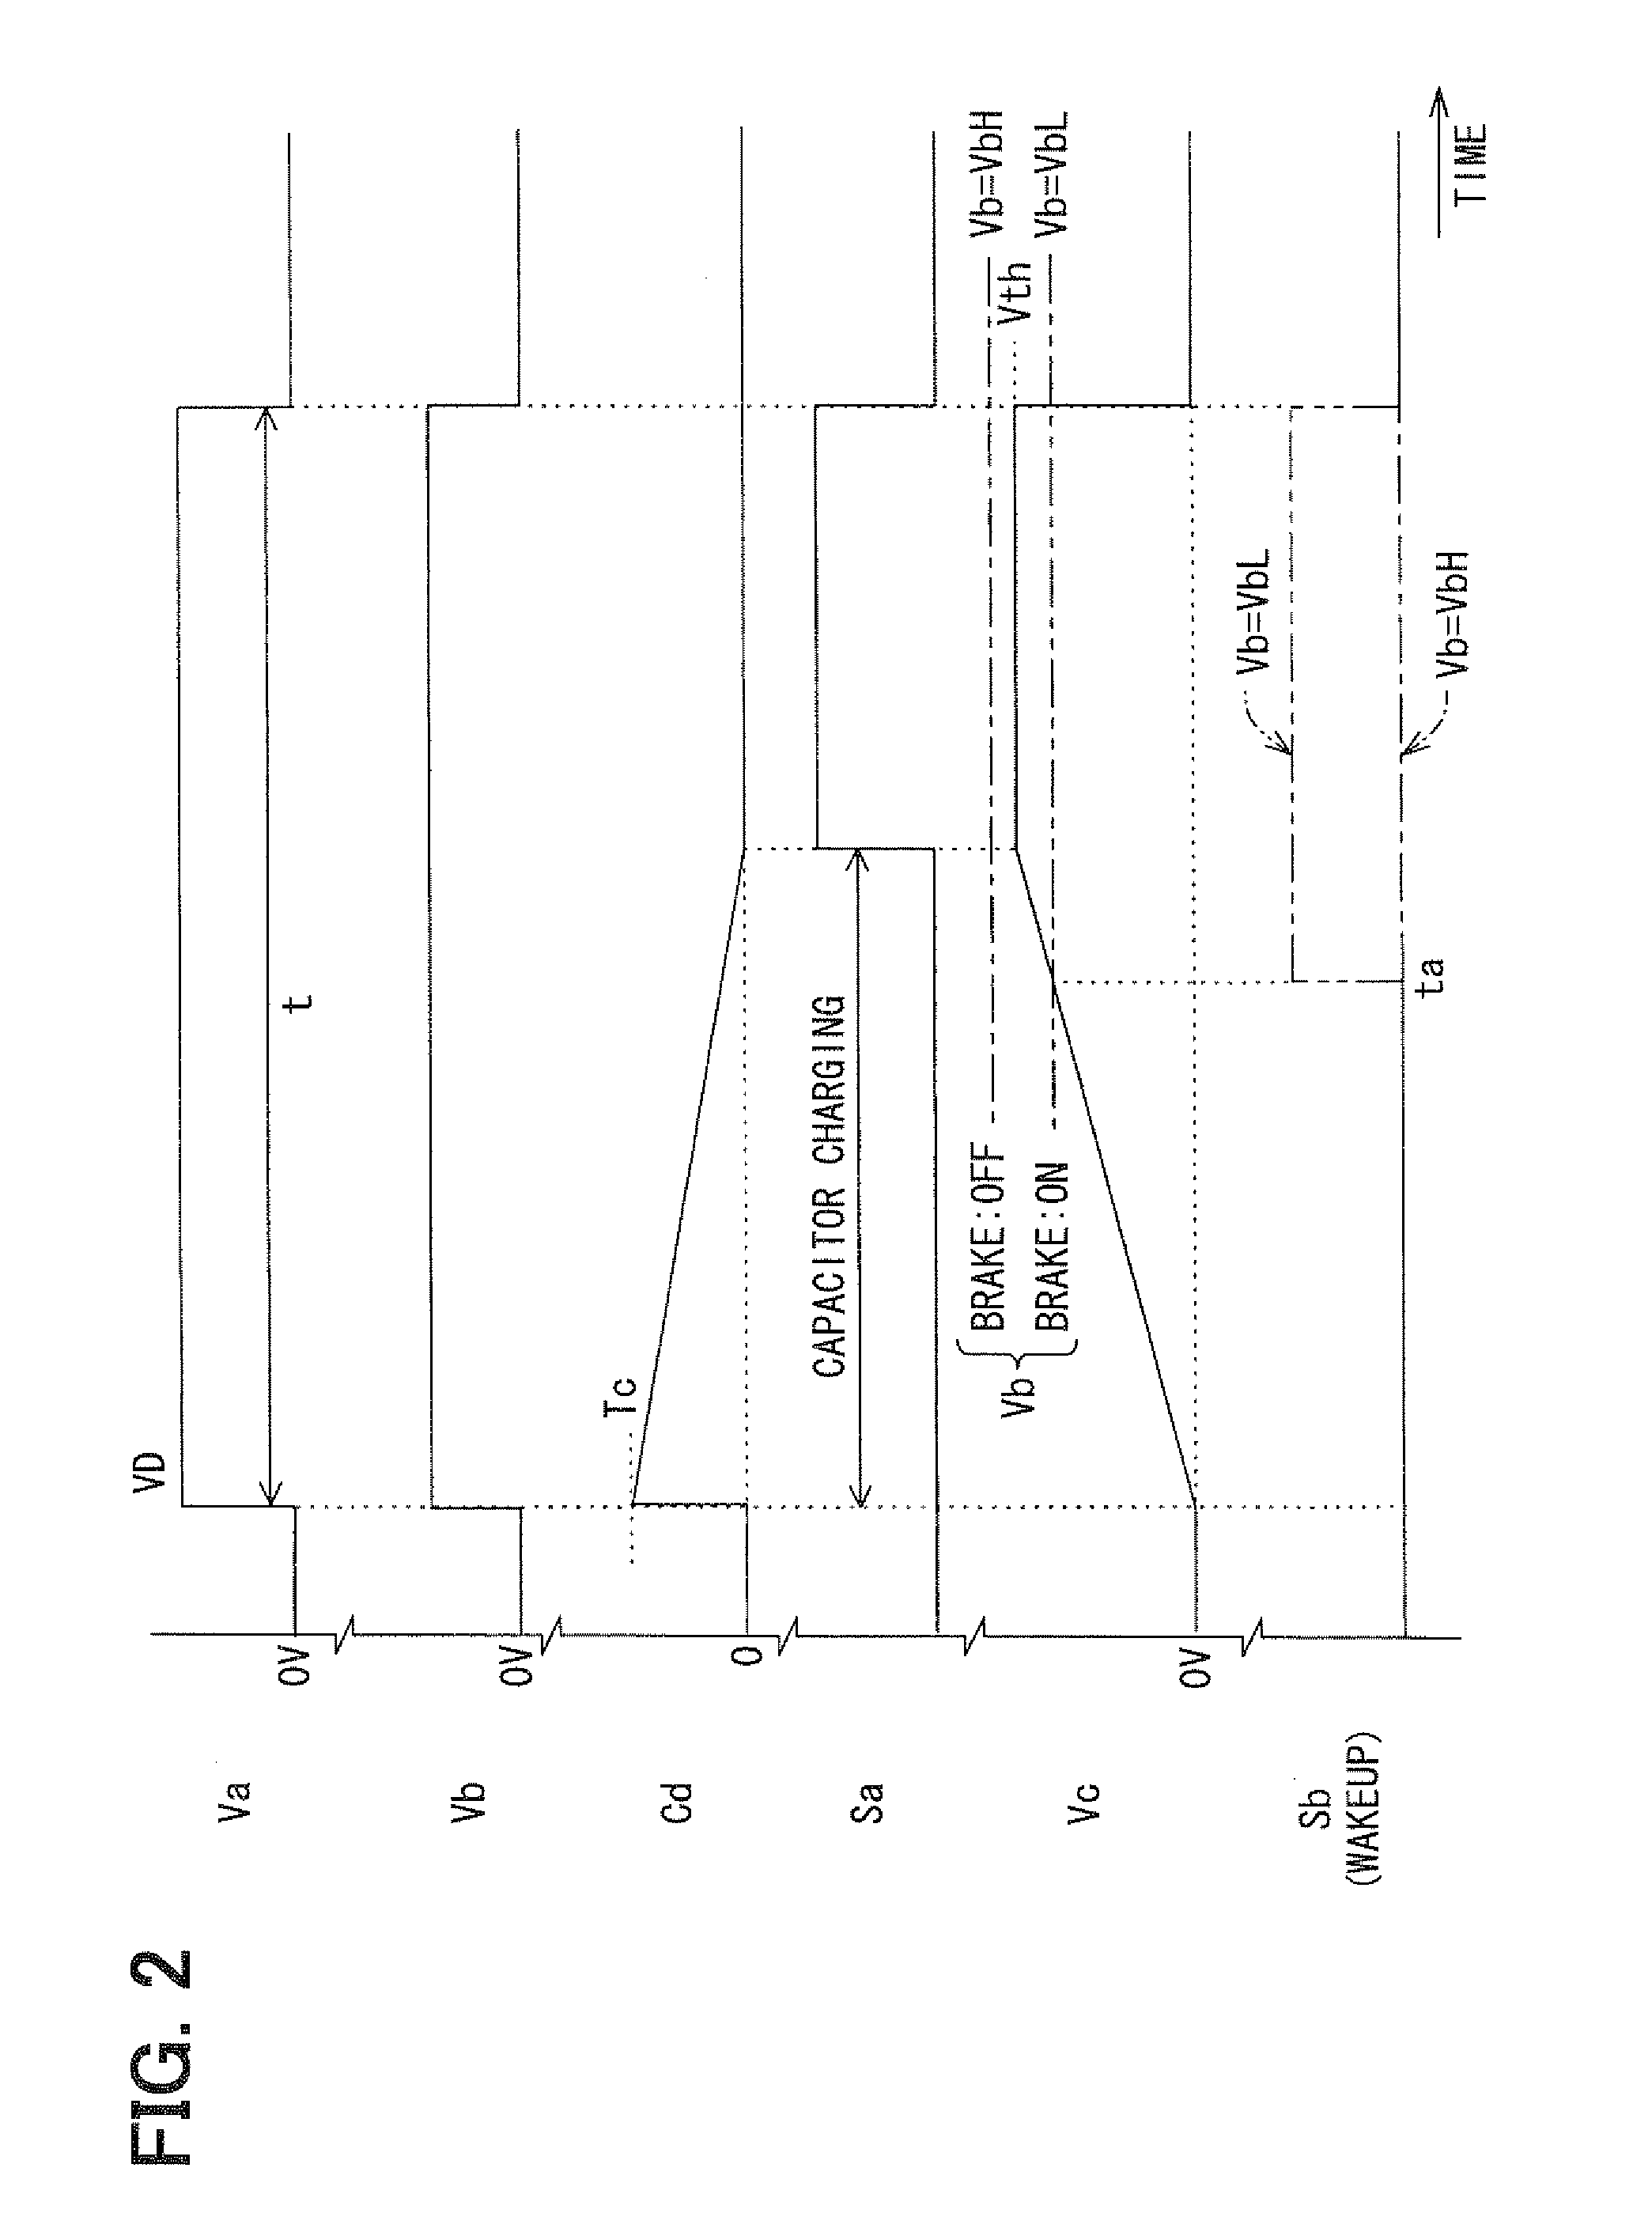 Electronic control unit and signal monitoring circuit